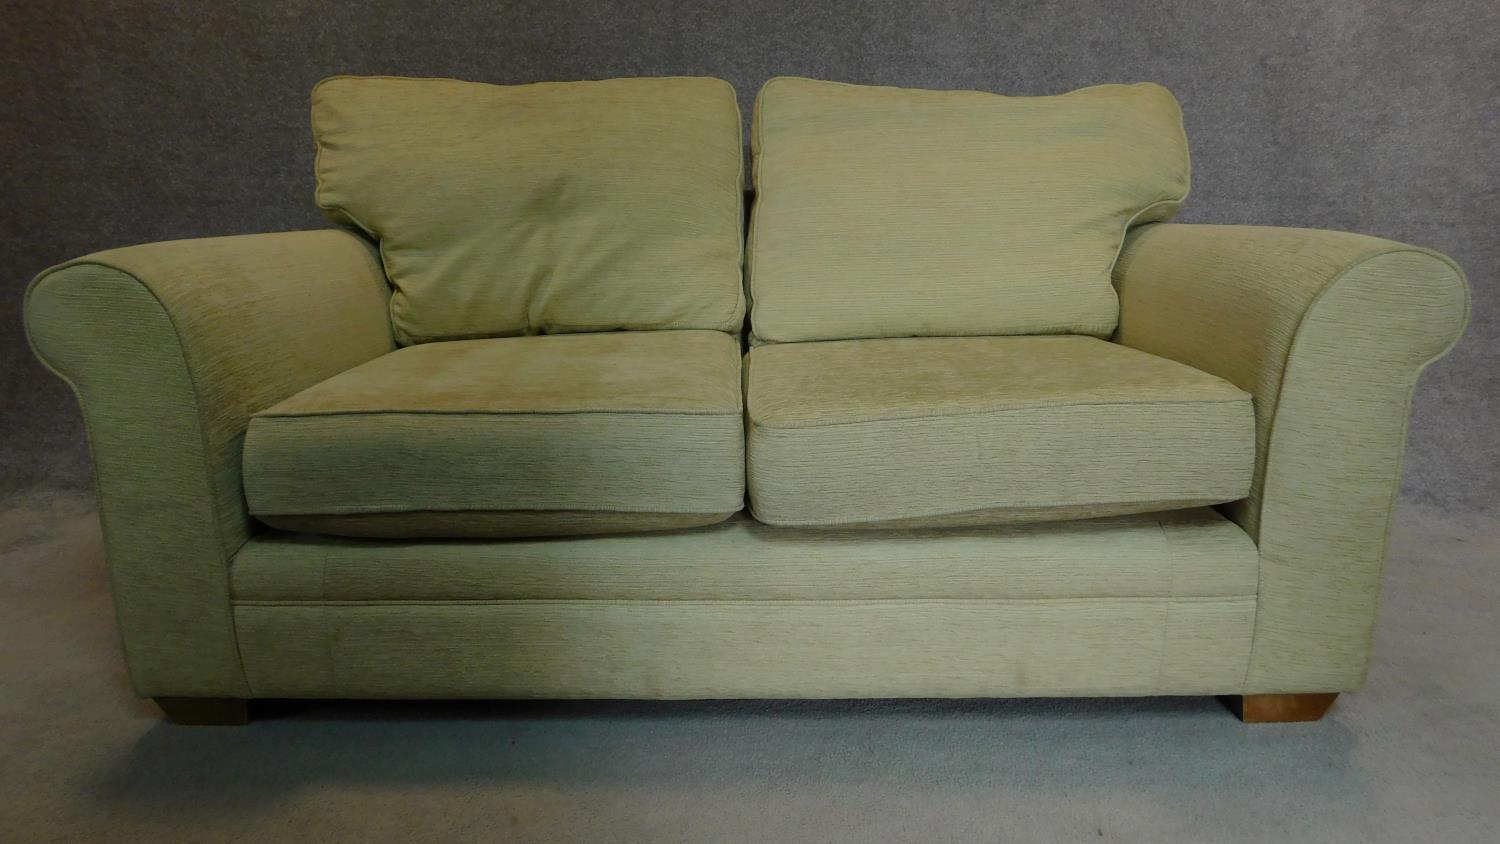 A two seater sofa in cream upholstery. 70x175x90cm - Image 2 of 4